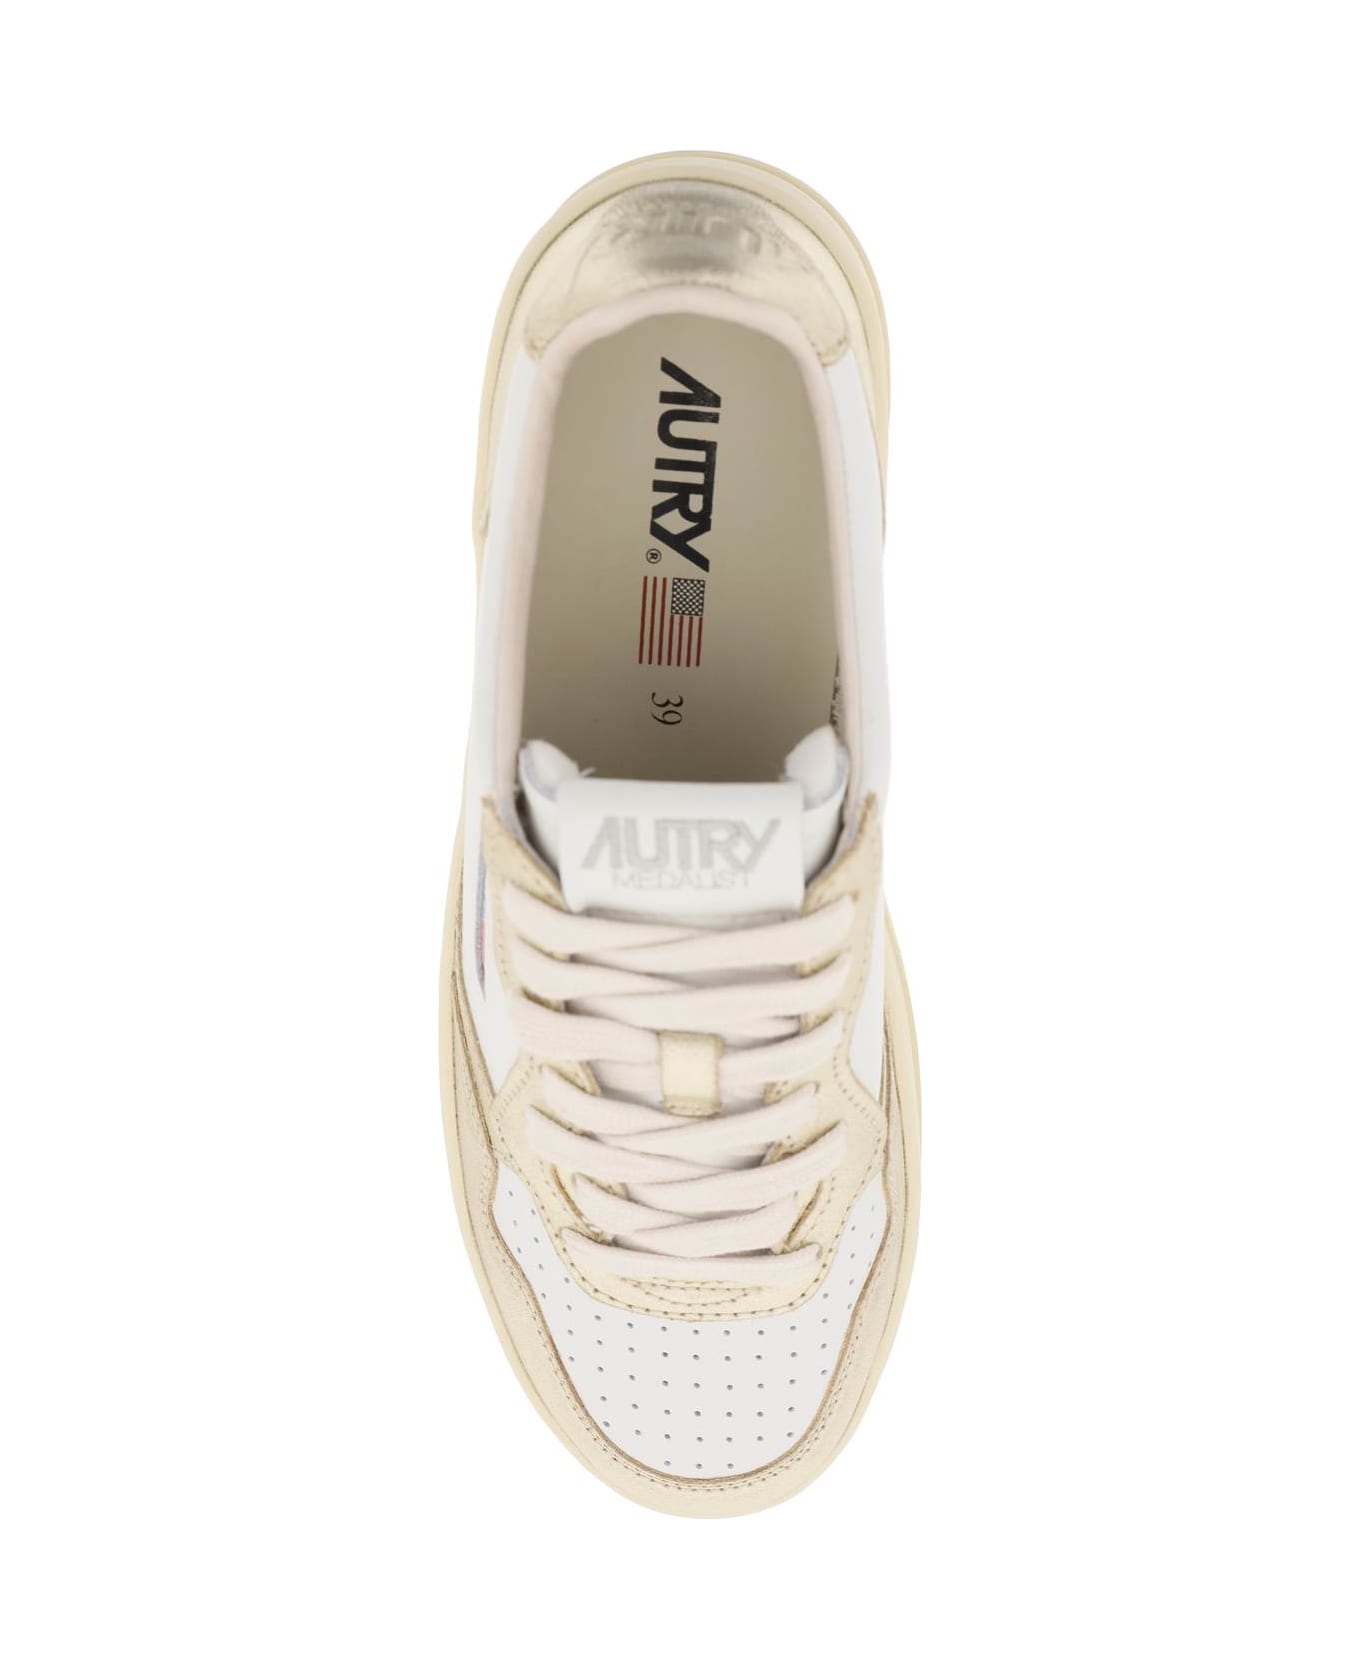 Autry Medalist Low Sneakers - WHITE PLATINUM (White)